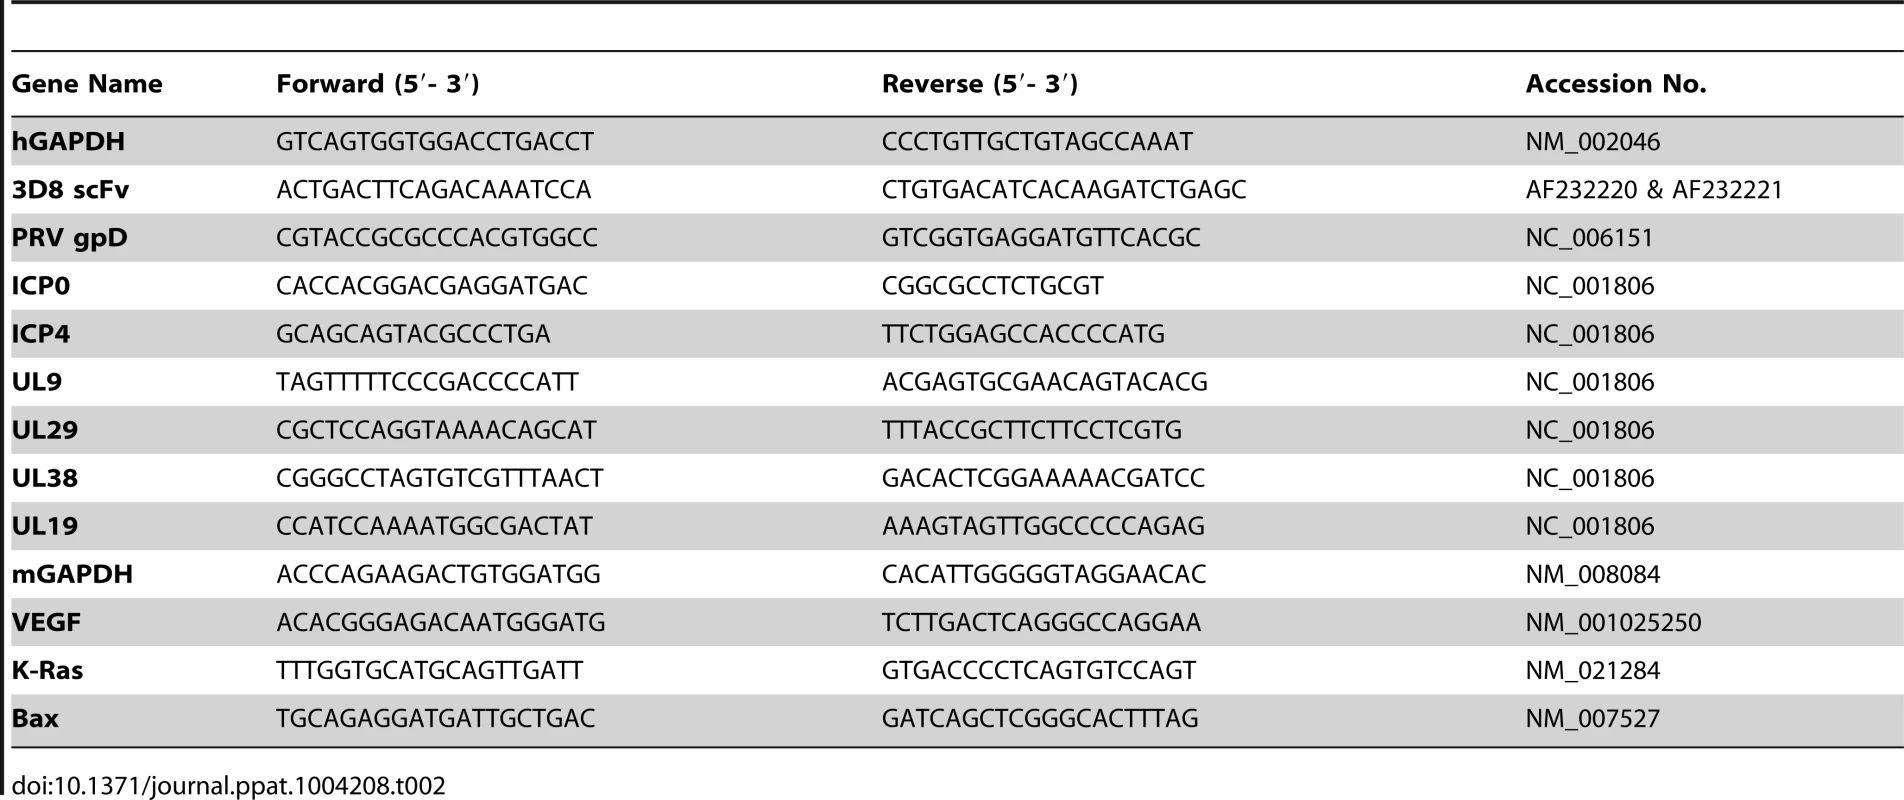 Polymerase chain reaction (PCR) primers for the detection of viral genes and global genes analyzed in this study.